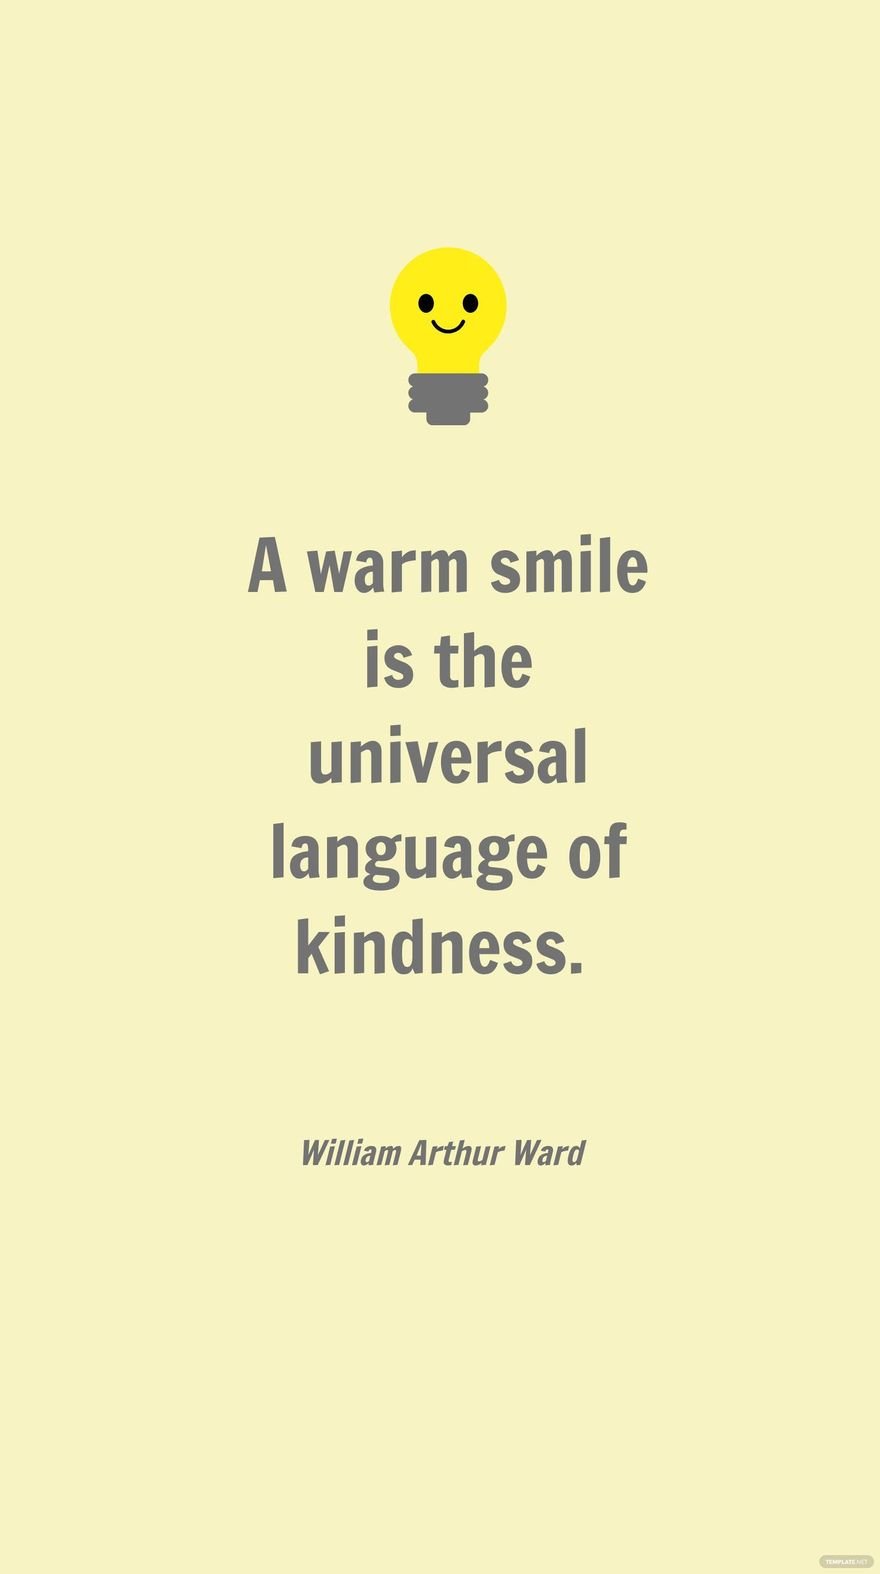 William Arthur Ward - A warm smile is the universal language of kindness.